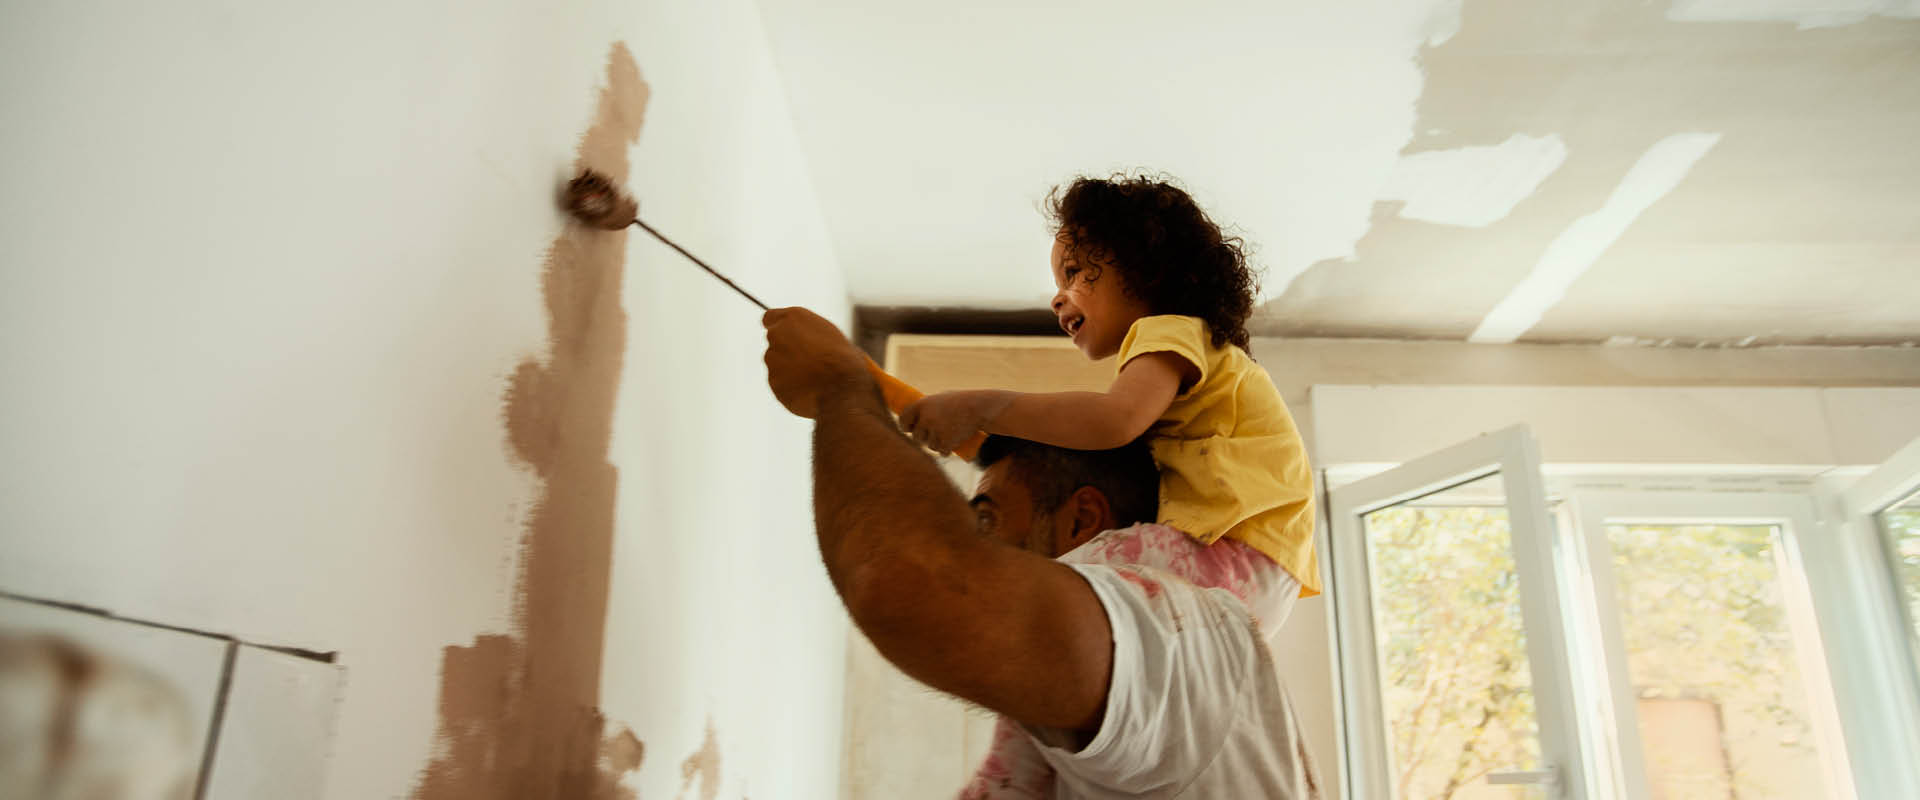 Child on father's shoulders painting internal wall